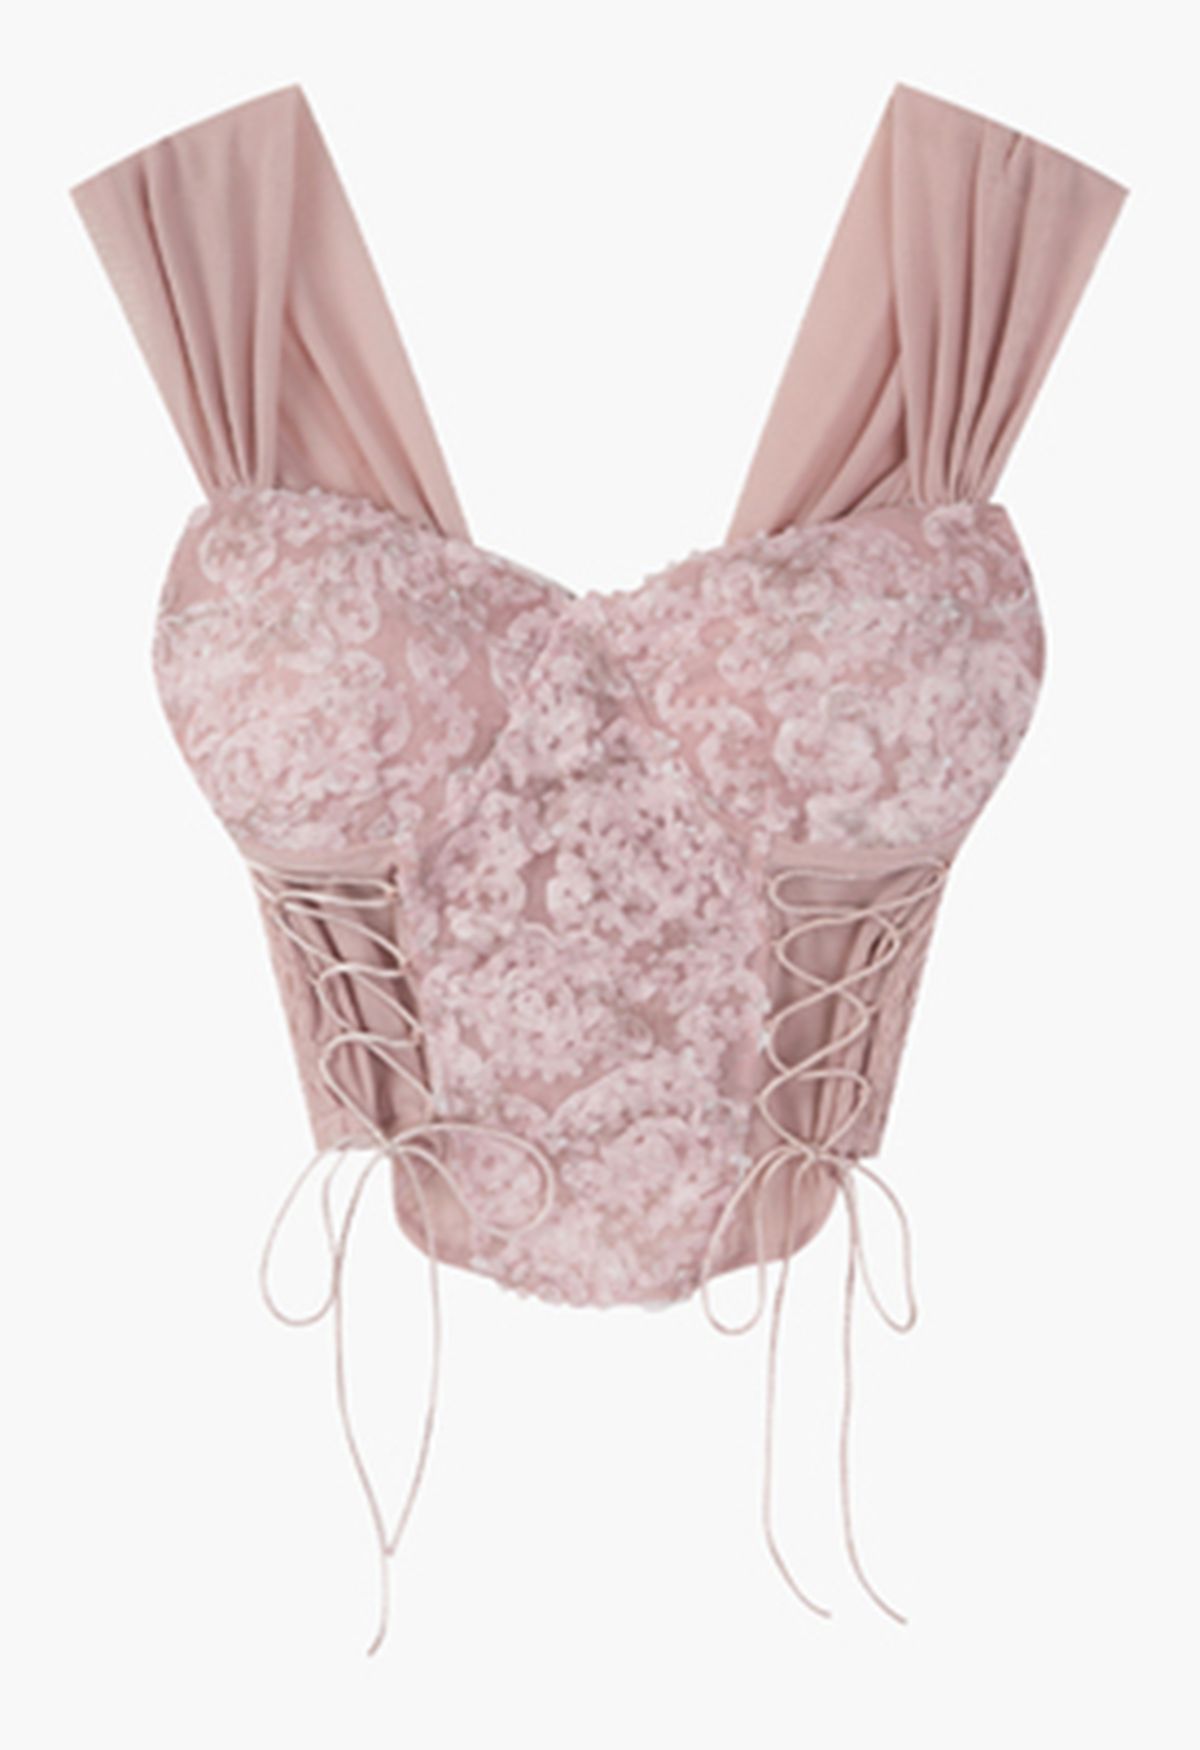 3D Flower Lace-Up Bustier Crop Top in Pink